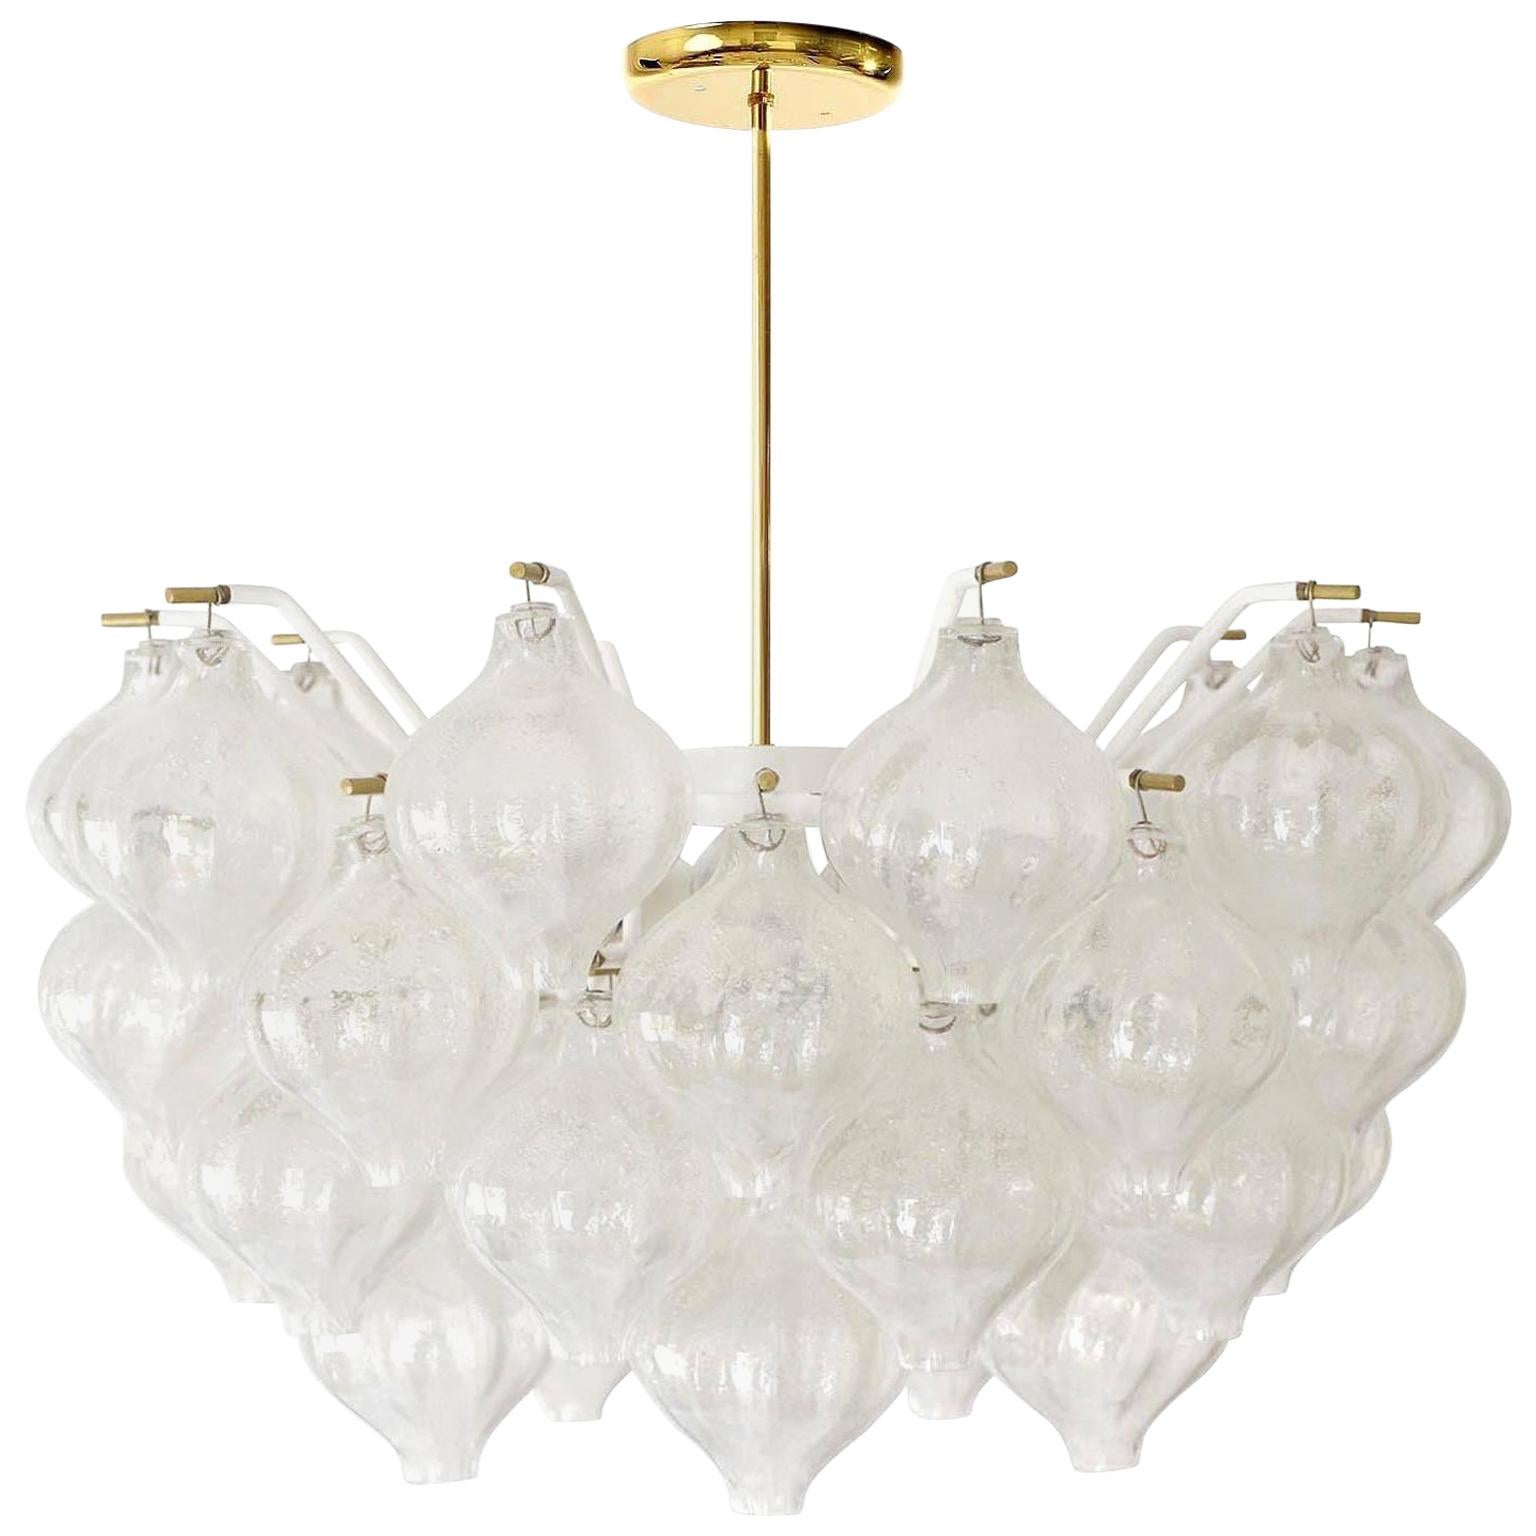 Currently only one light is available.
One of two fantastic light fixtures model Tulipan by J.T. Kalmar, Vienna, Austria, manufactured in midcentury, circa 1970 (late 1960s or early 1970s).
The name Tulipan derives from the tulip shaped hand blown